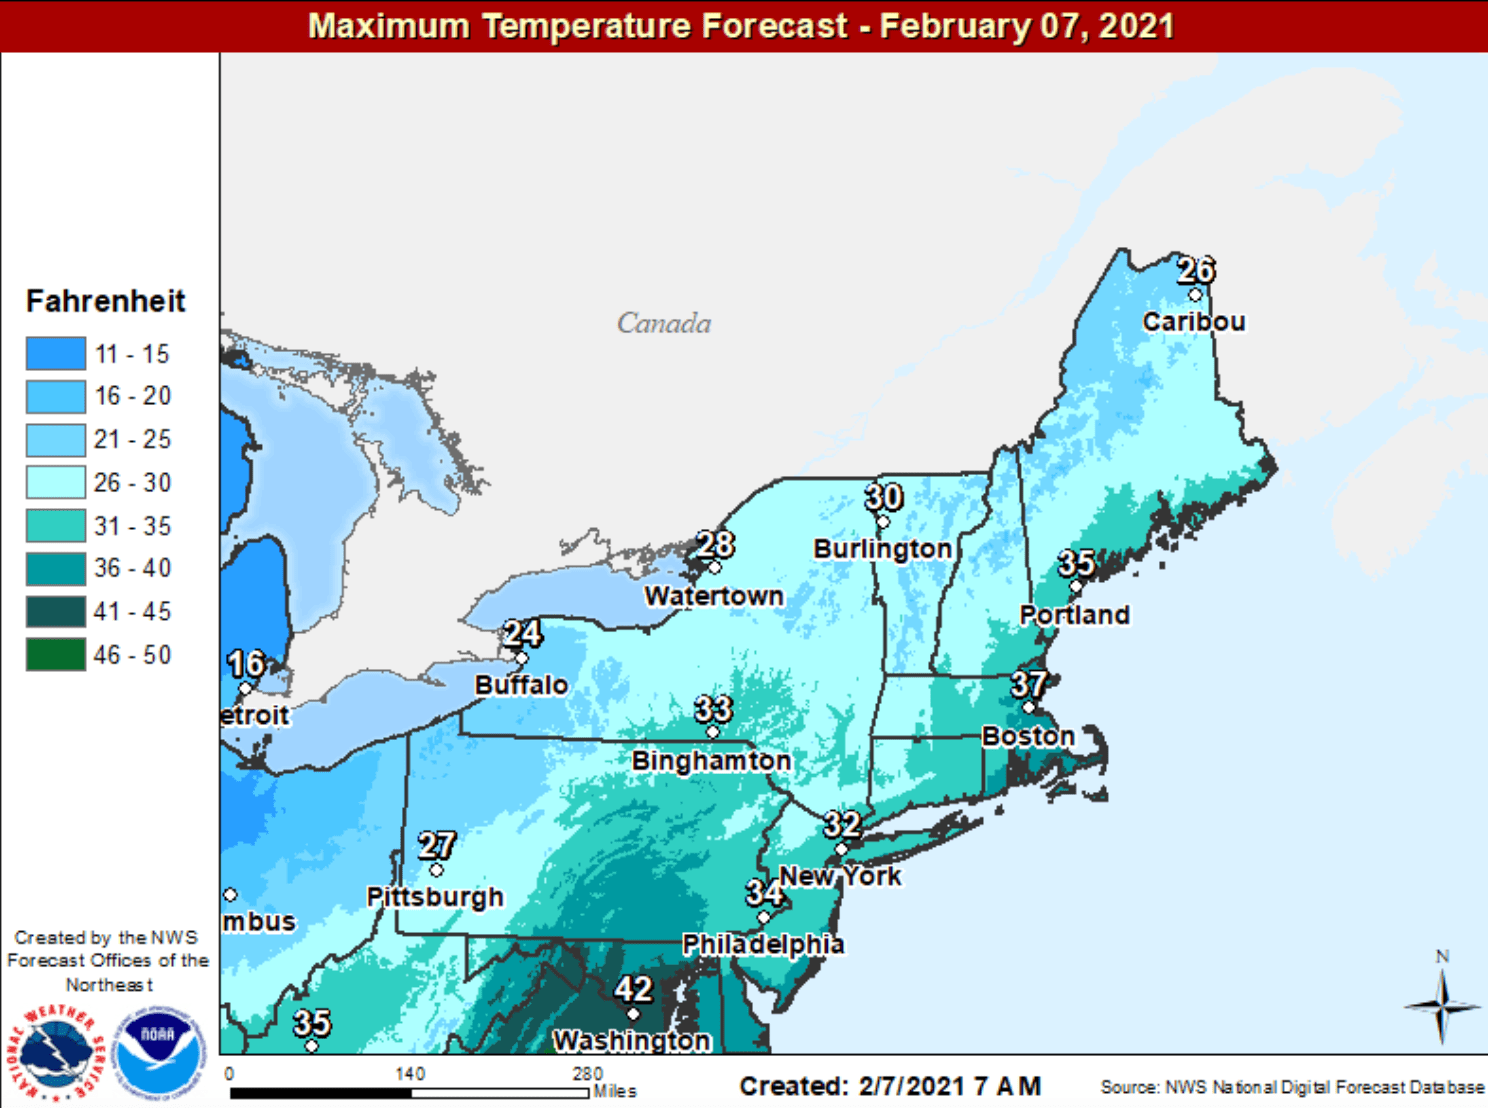 Temperatures will be above freezing at the coastline for a heavier and wetter snow there. (NOAA)